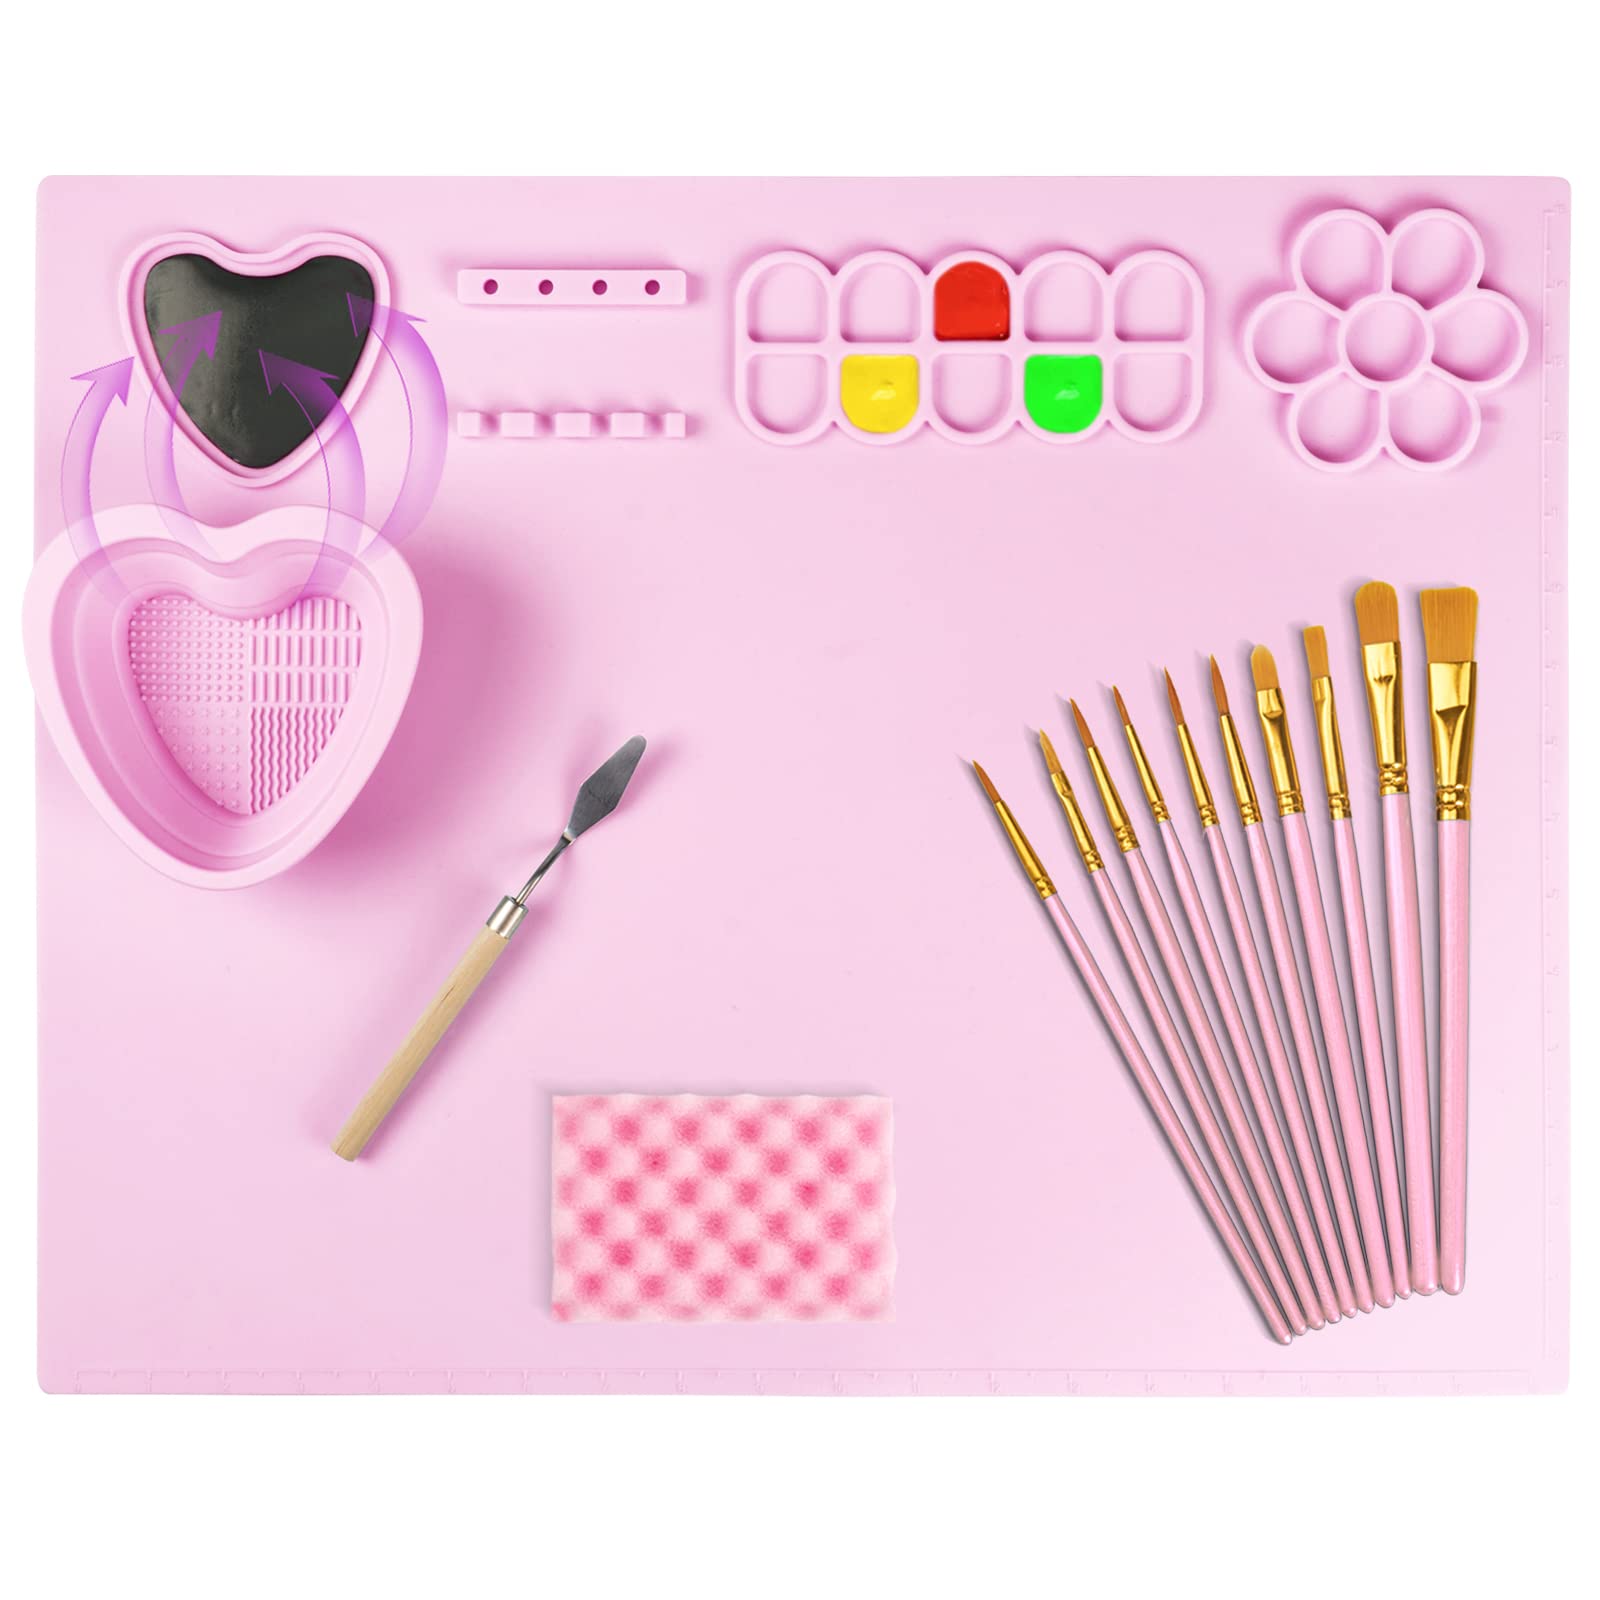  Silicone Painting Mat, Art Mat with Cup, Craft Paint Brush  Cleaner Tool, Artist for Kids Gift Clay DIY Creations (Pink)